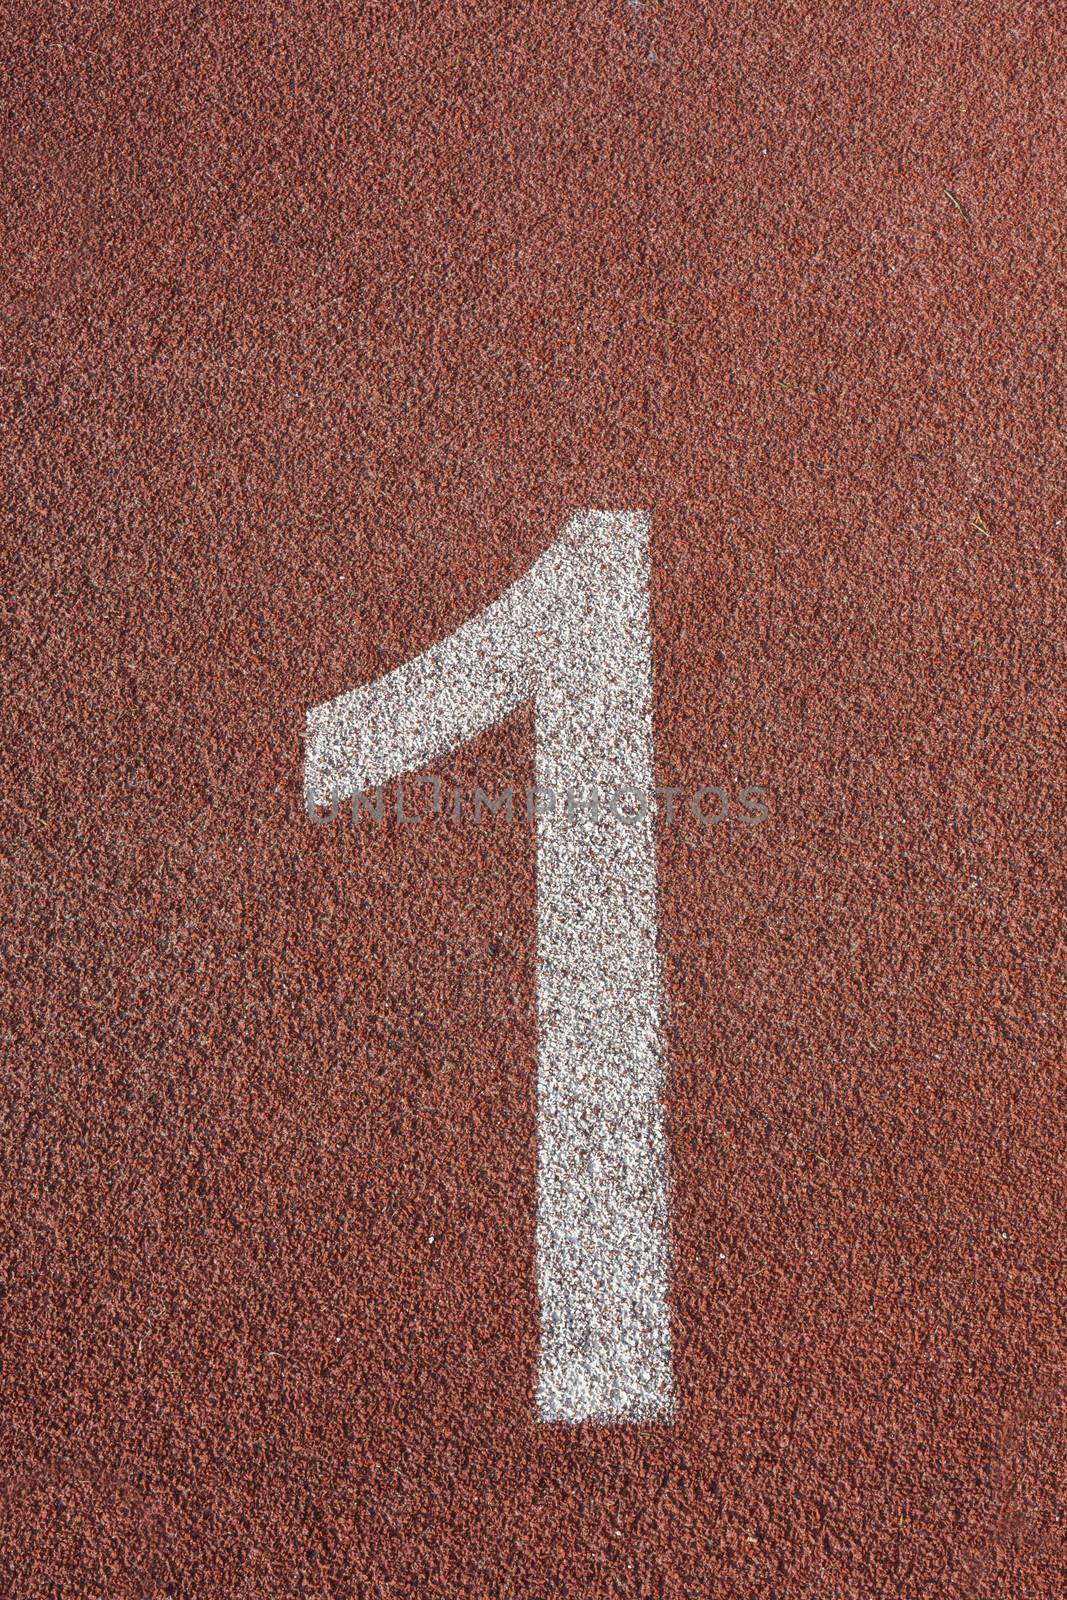 number one track on a Athletics track on the public stadium by Tjeerdkruse